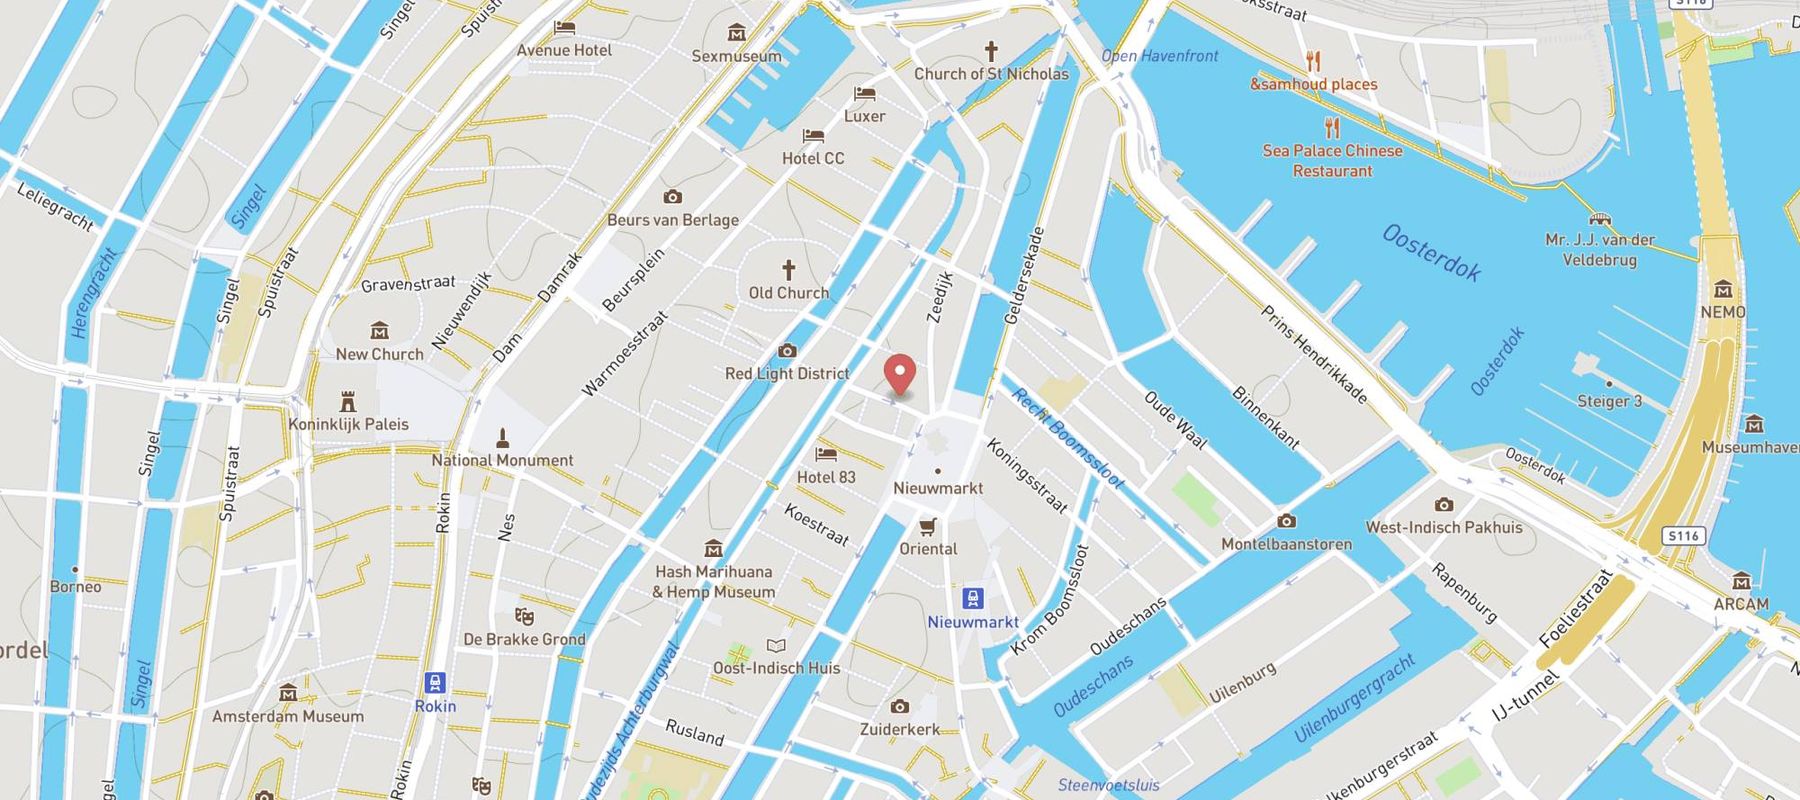 The Amsterdam Hotel Apartments map